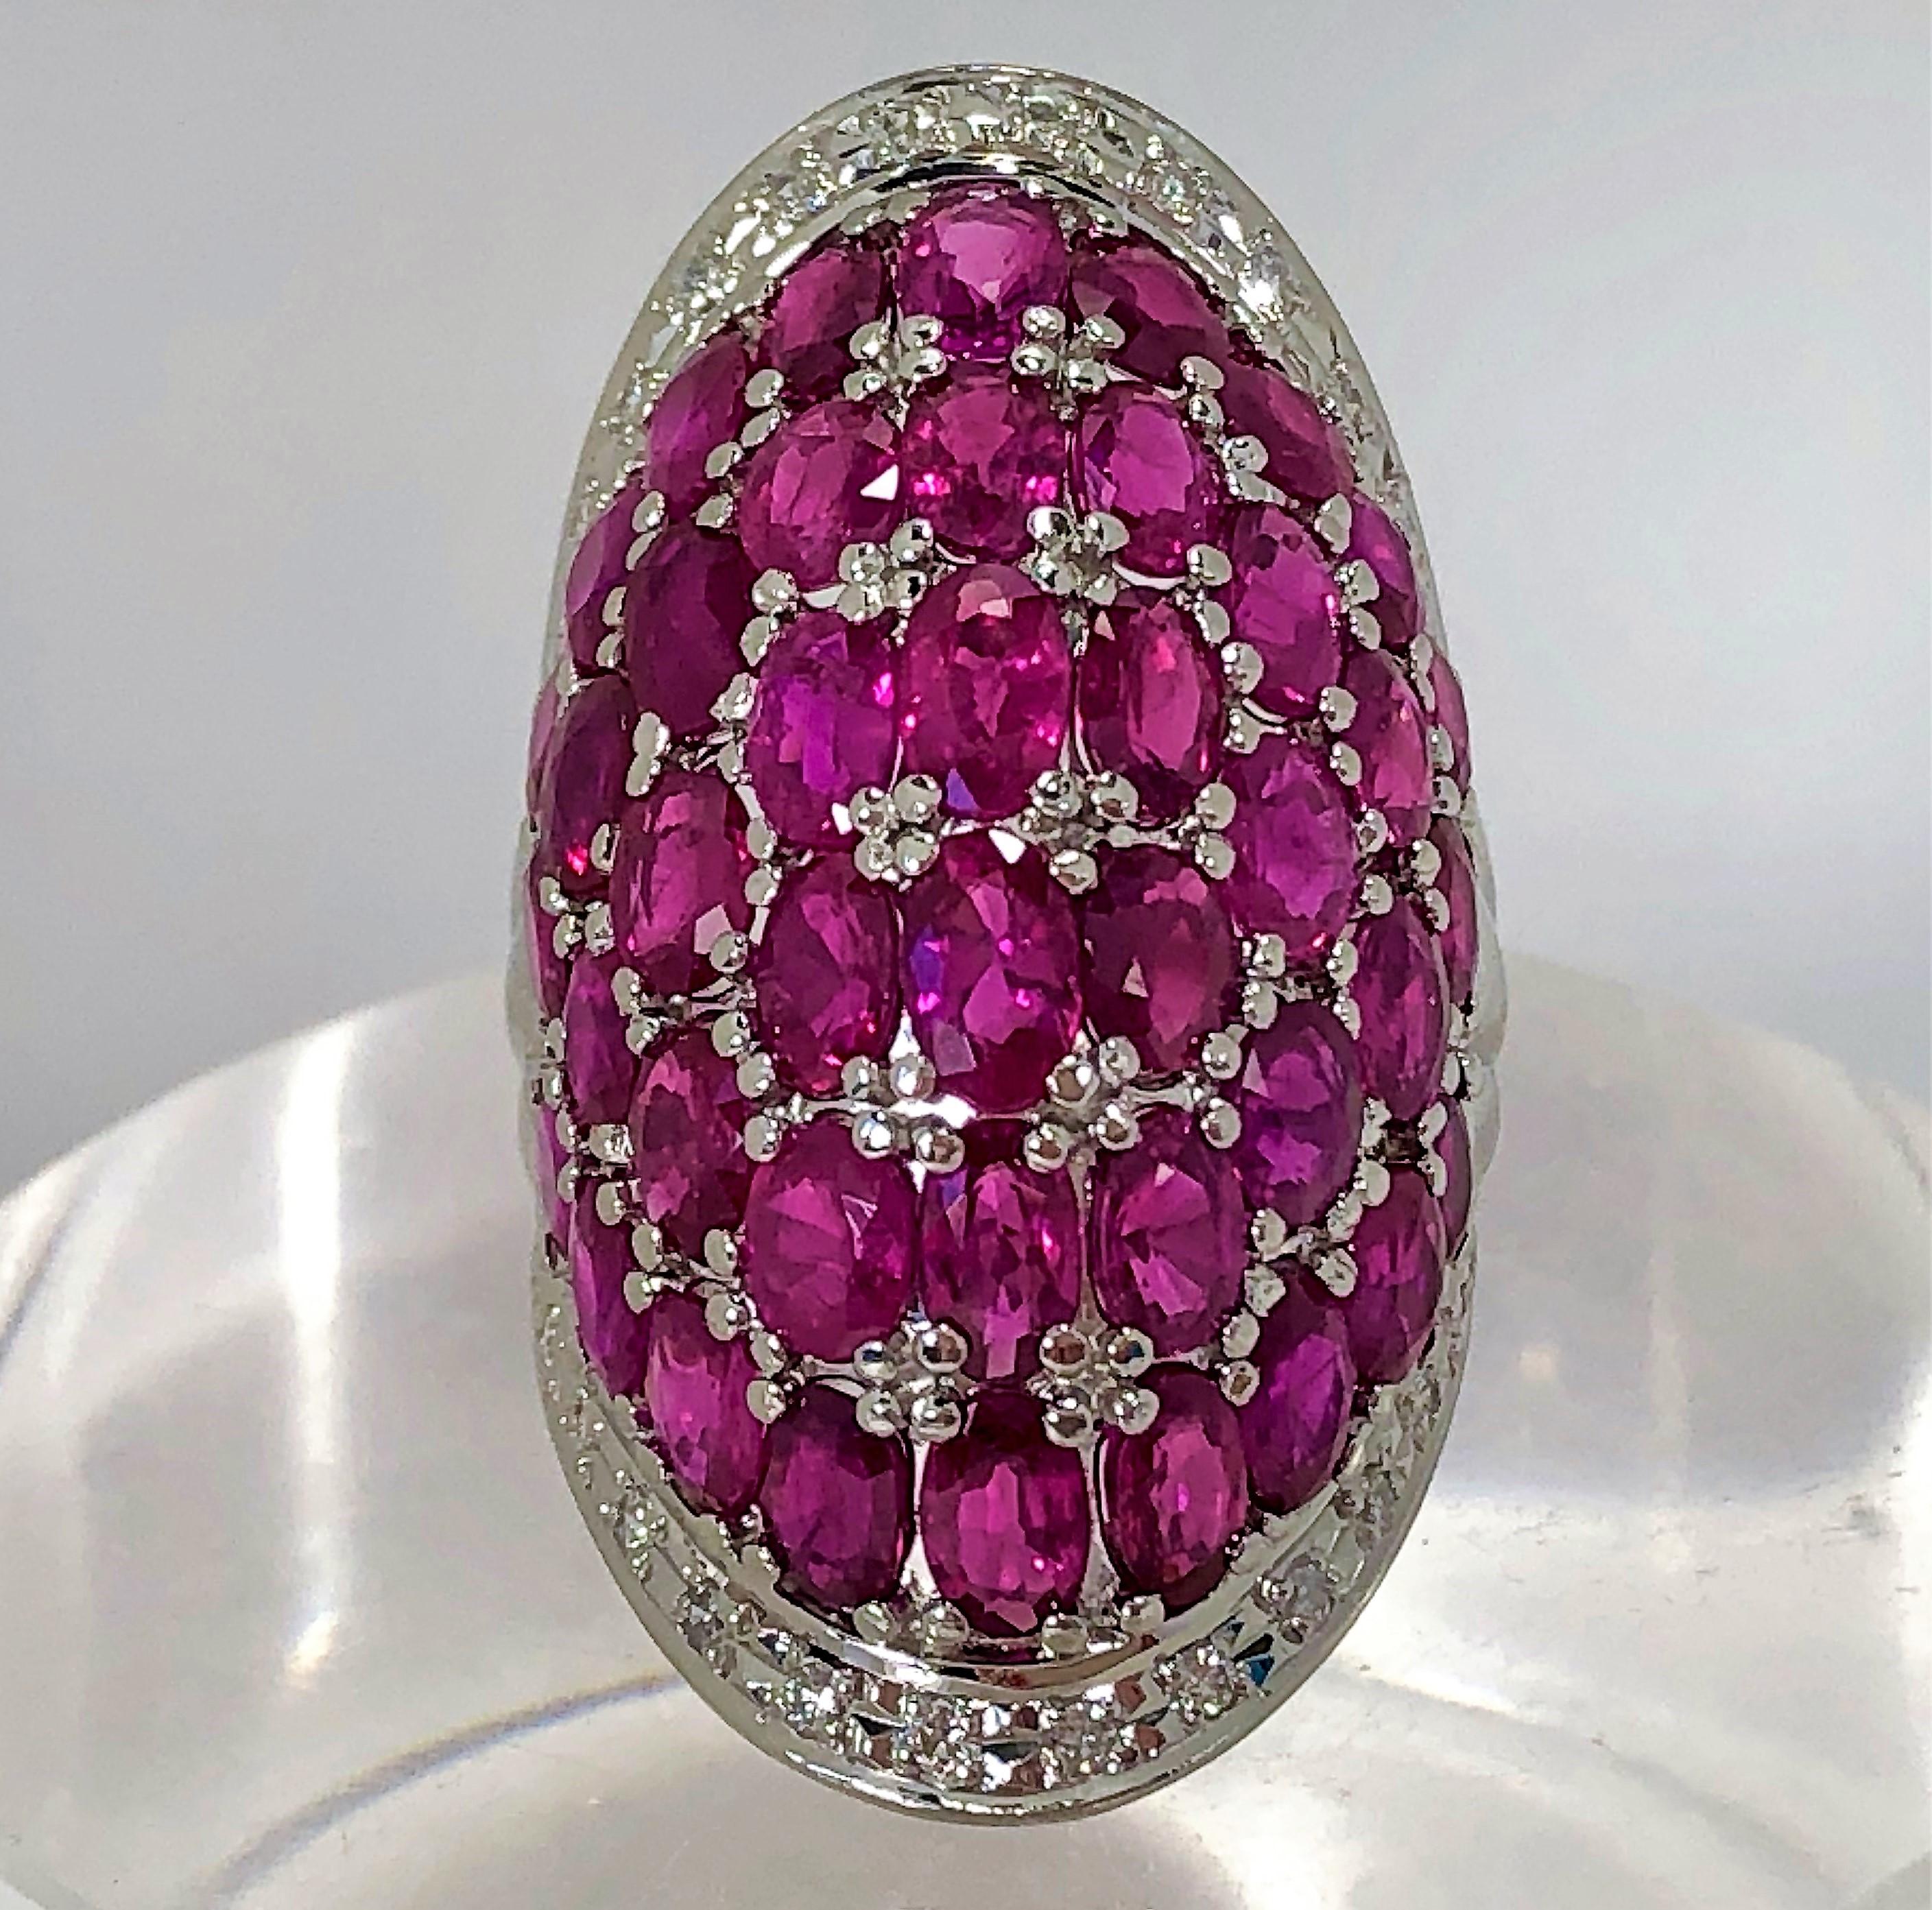 A beautifully contoured platinum ring set with assorted oval, faceted rubies weighing a combined weight of approximately 12.33 carats with even saturation and  medium tone. Accenting the ruby are assorted round brilliant cut diamonds weighing 0.24ct